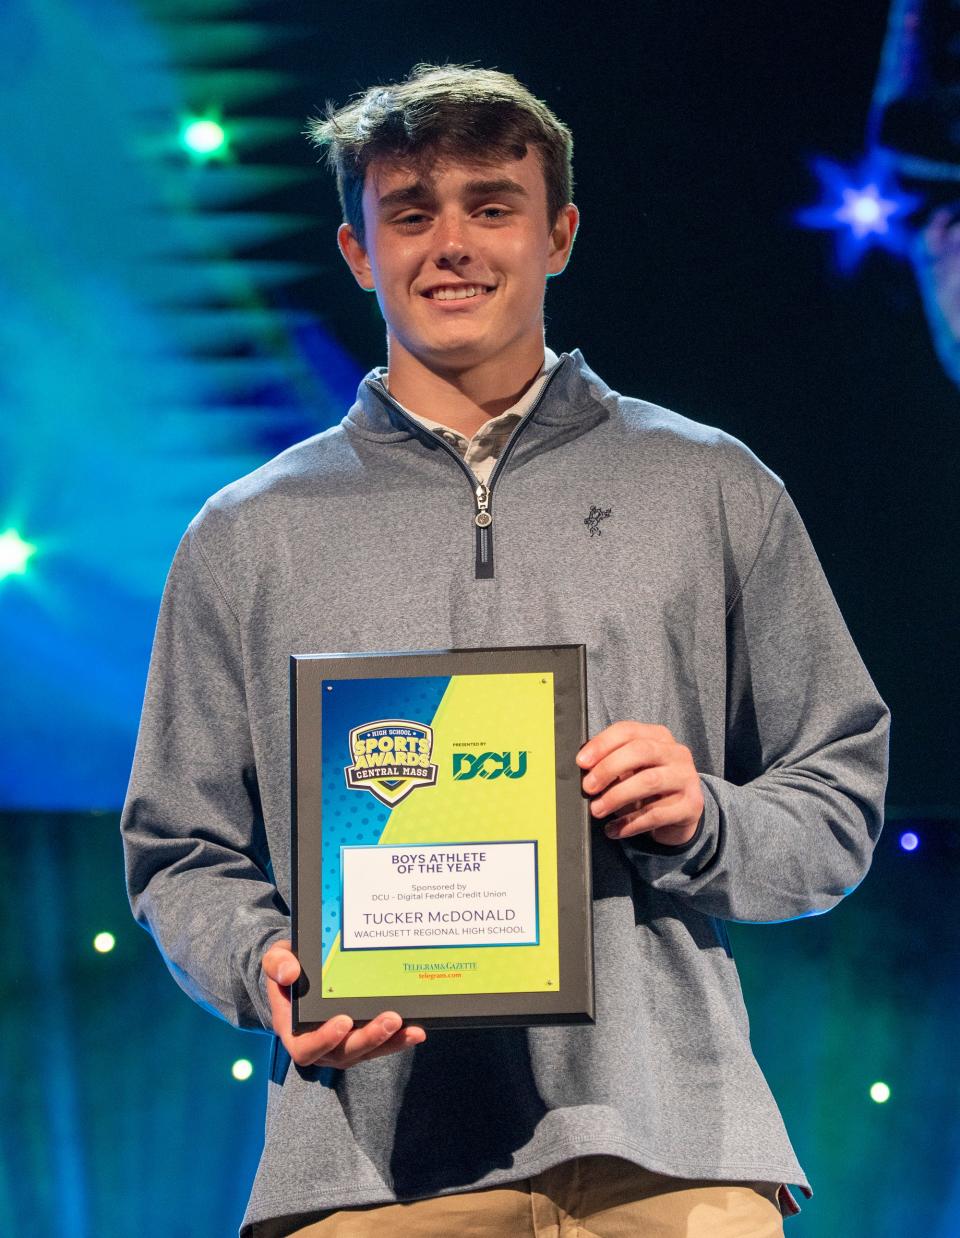 Wachusett's Tucker McDonald was named the Hometeam Male Athlete of the Year as the top student-athletes in Central Massachusetts were honored Wednesday night at the Hanover Theatre at the Central Mass. High School Sports Awards ceremony.